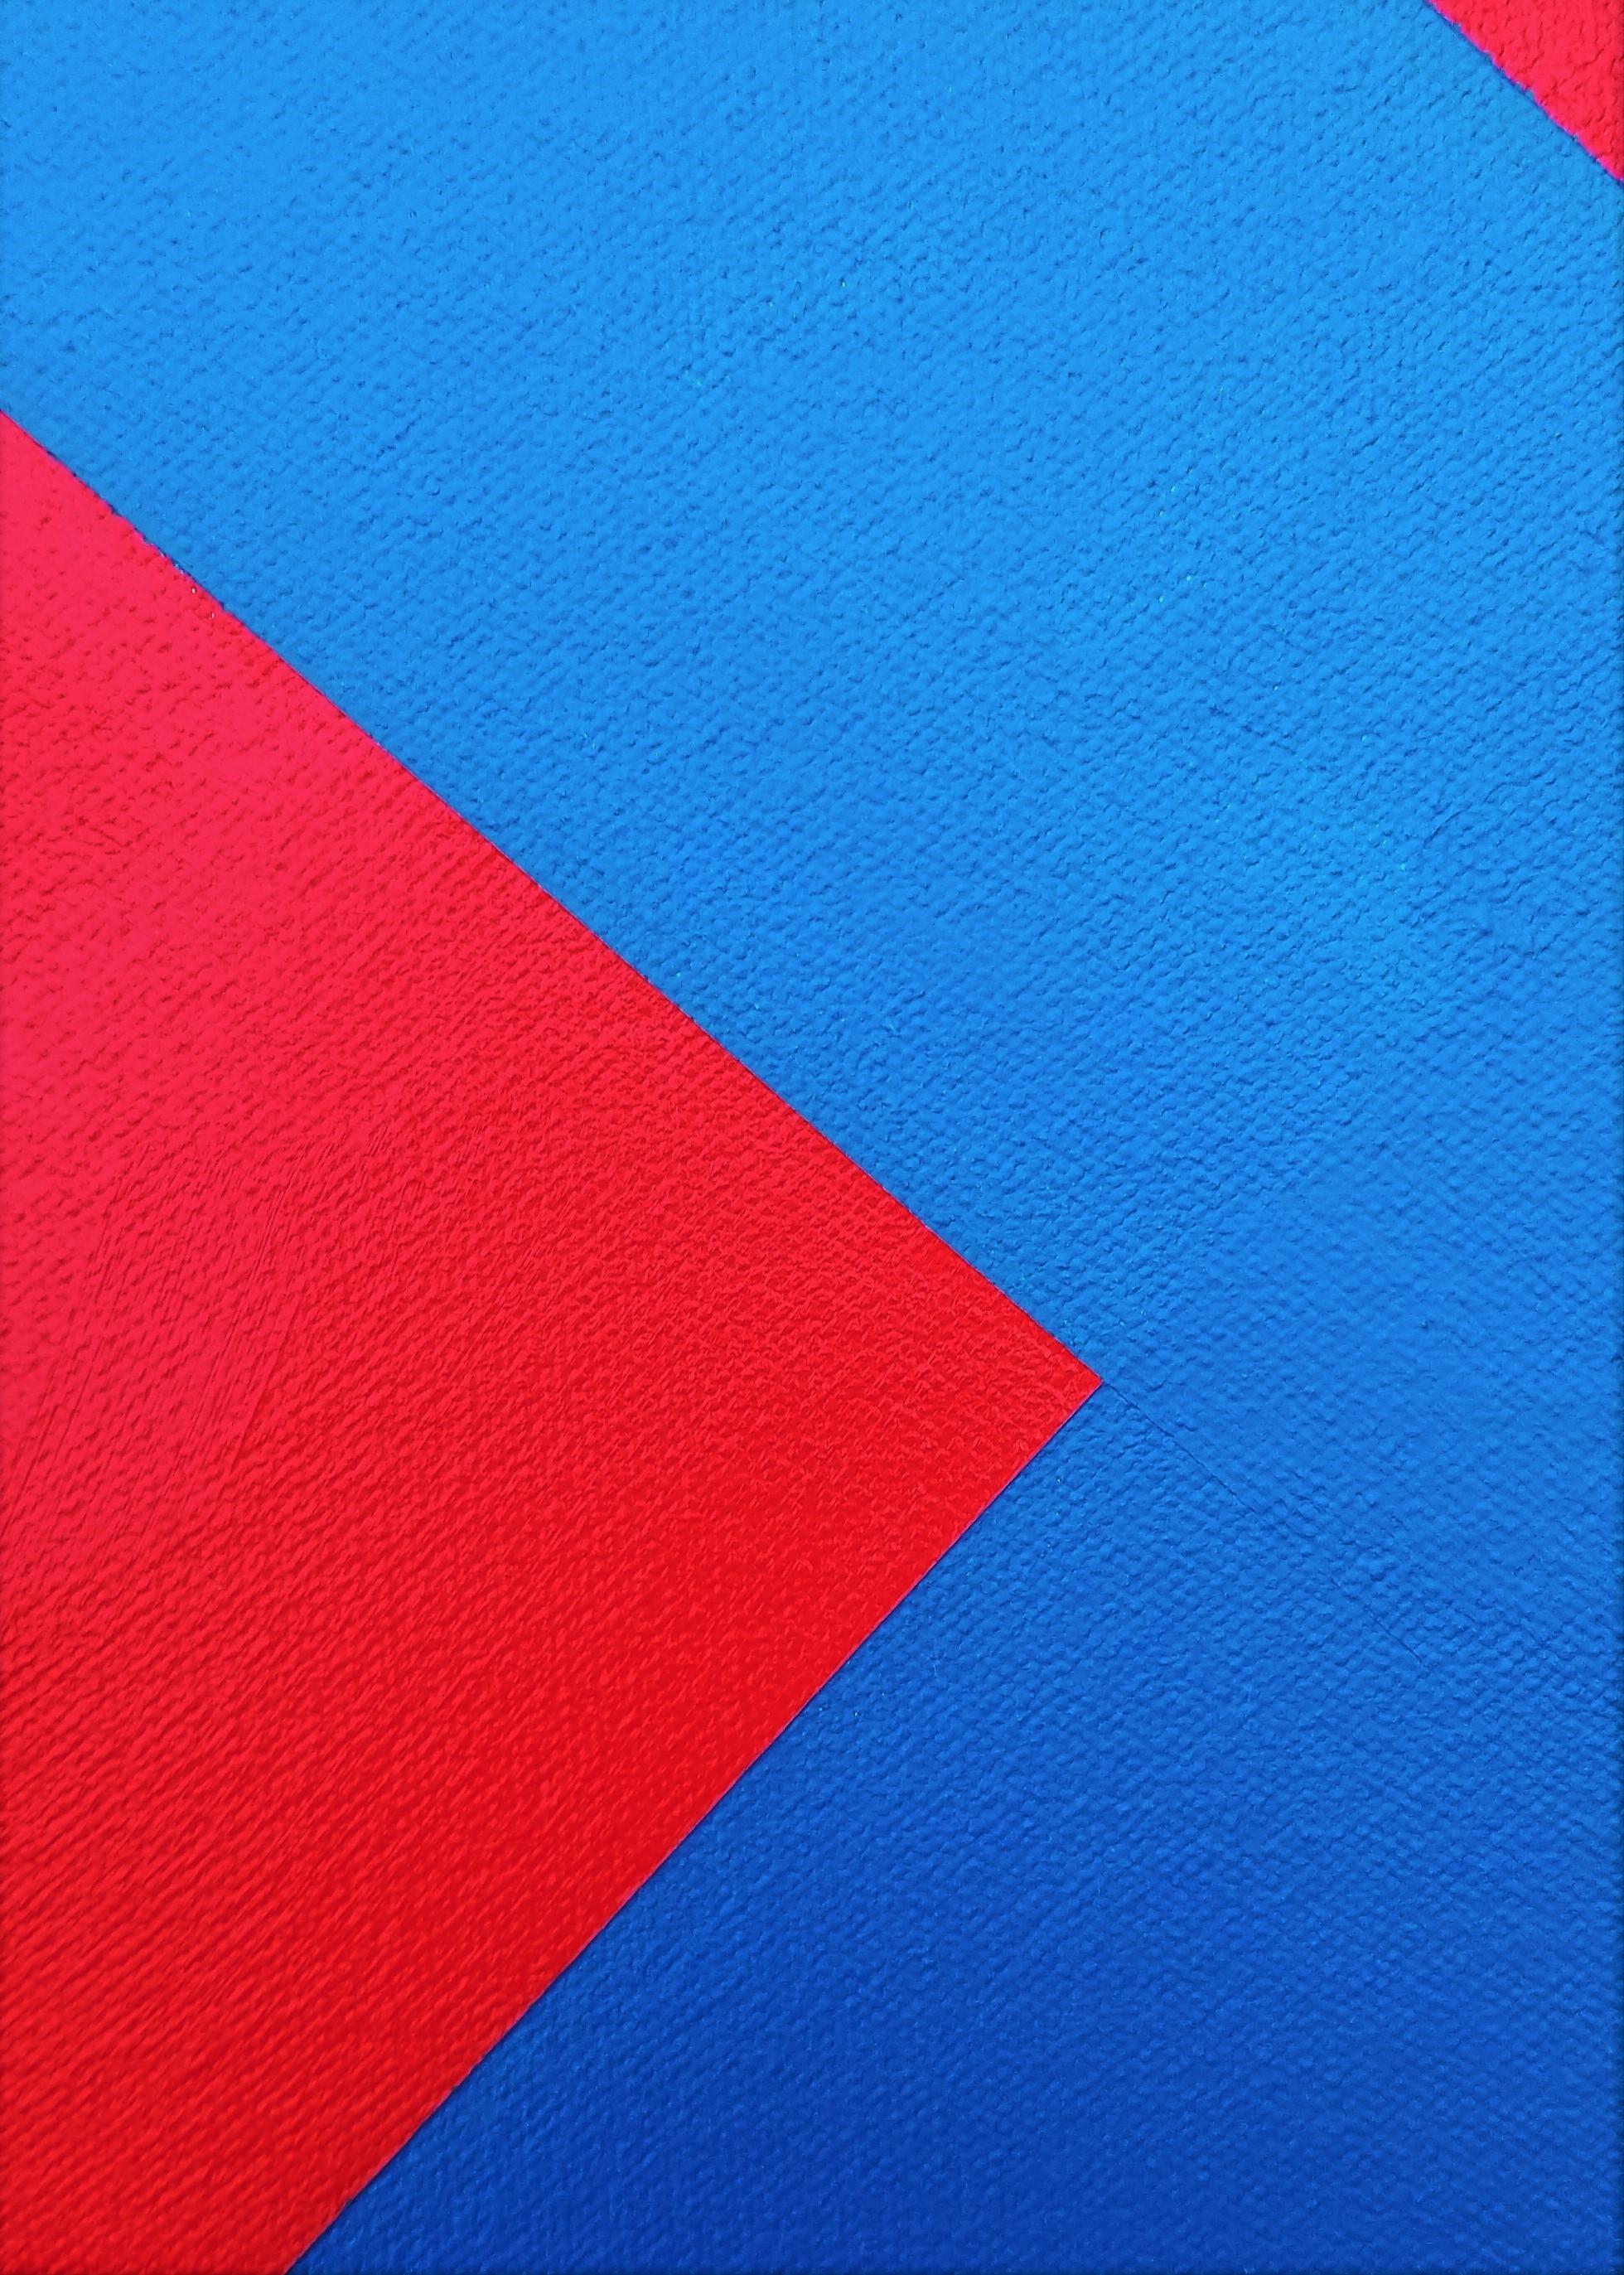 Diamond XLV /// Contemporary Abstract Geometric Striped Blue Red White Painting For Sale 7